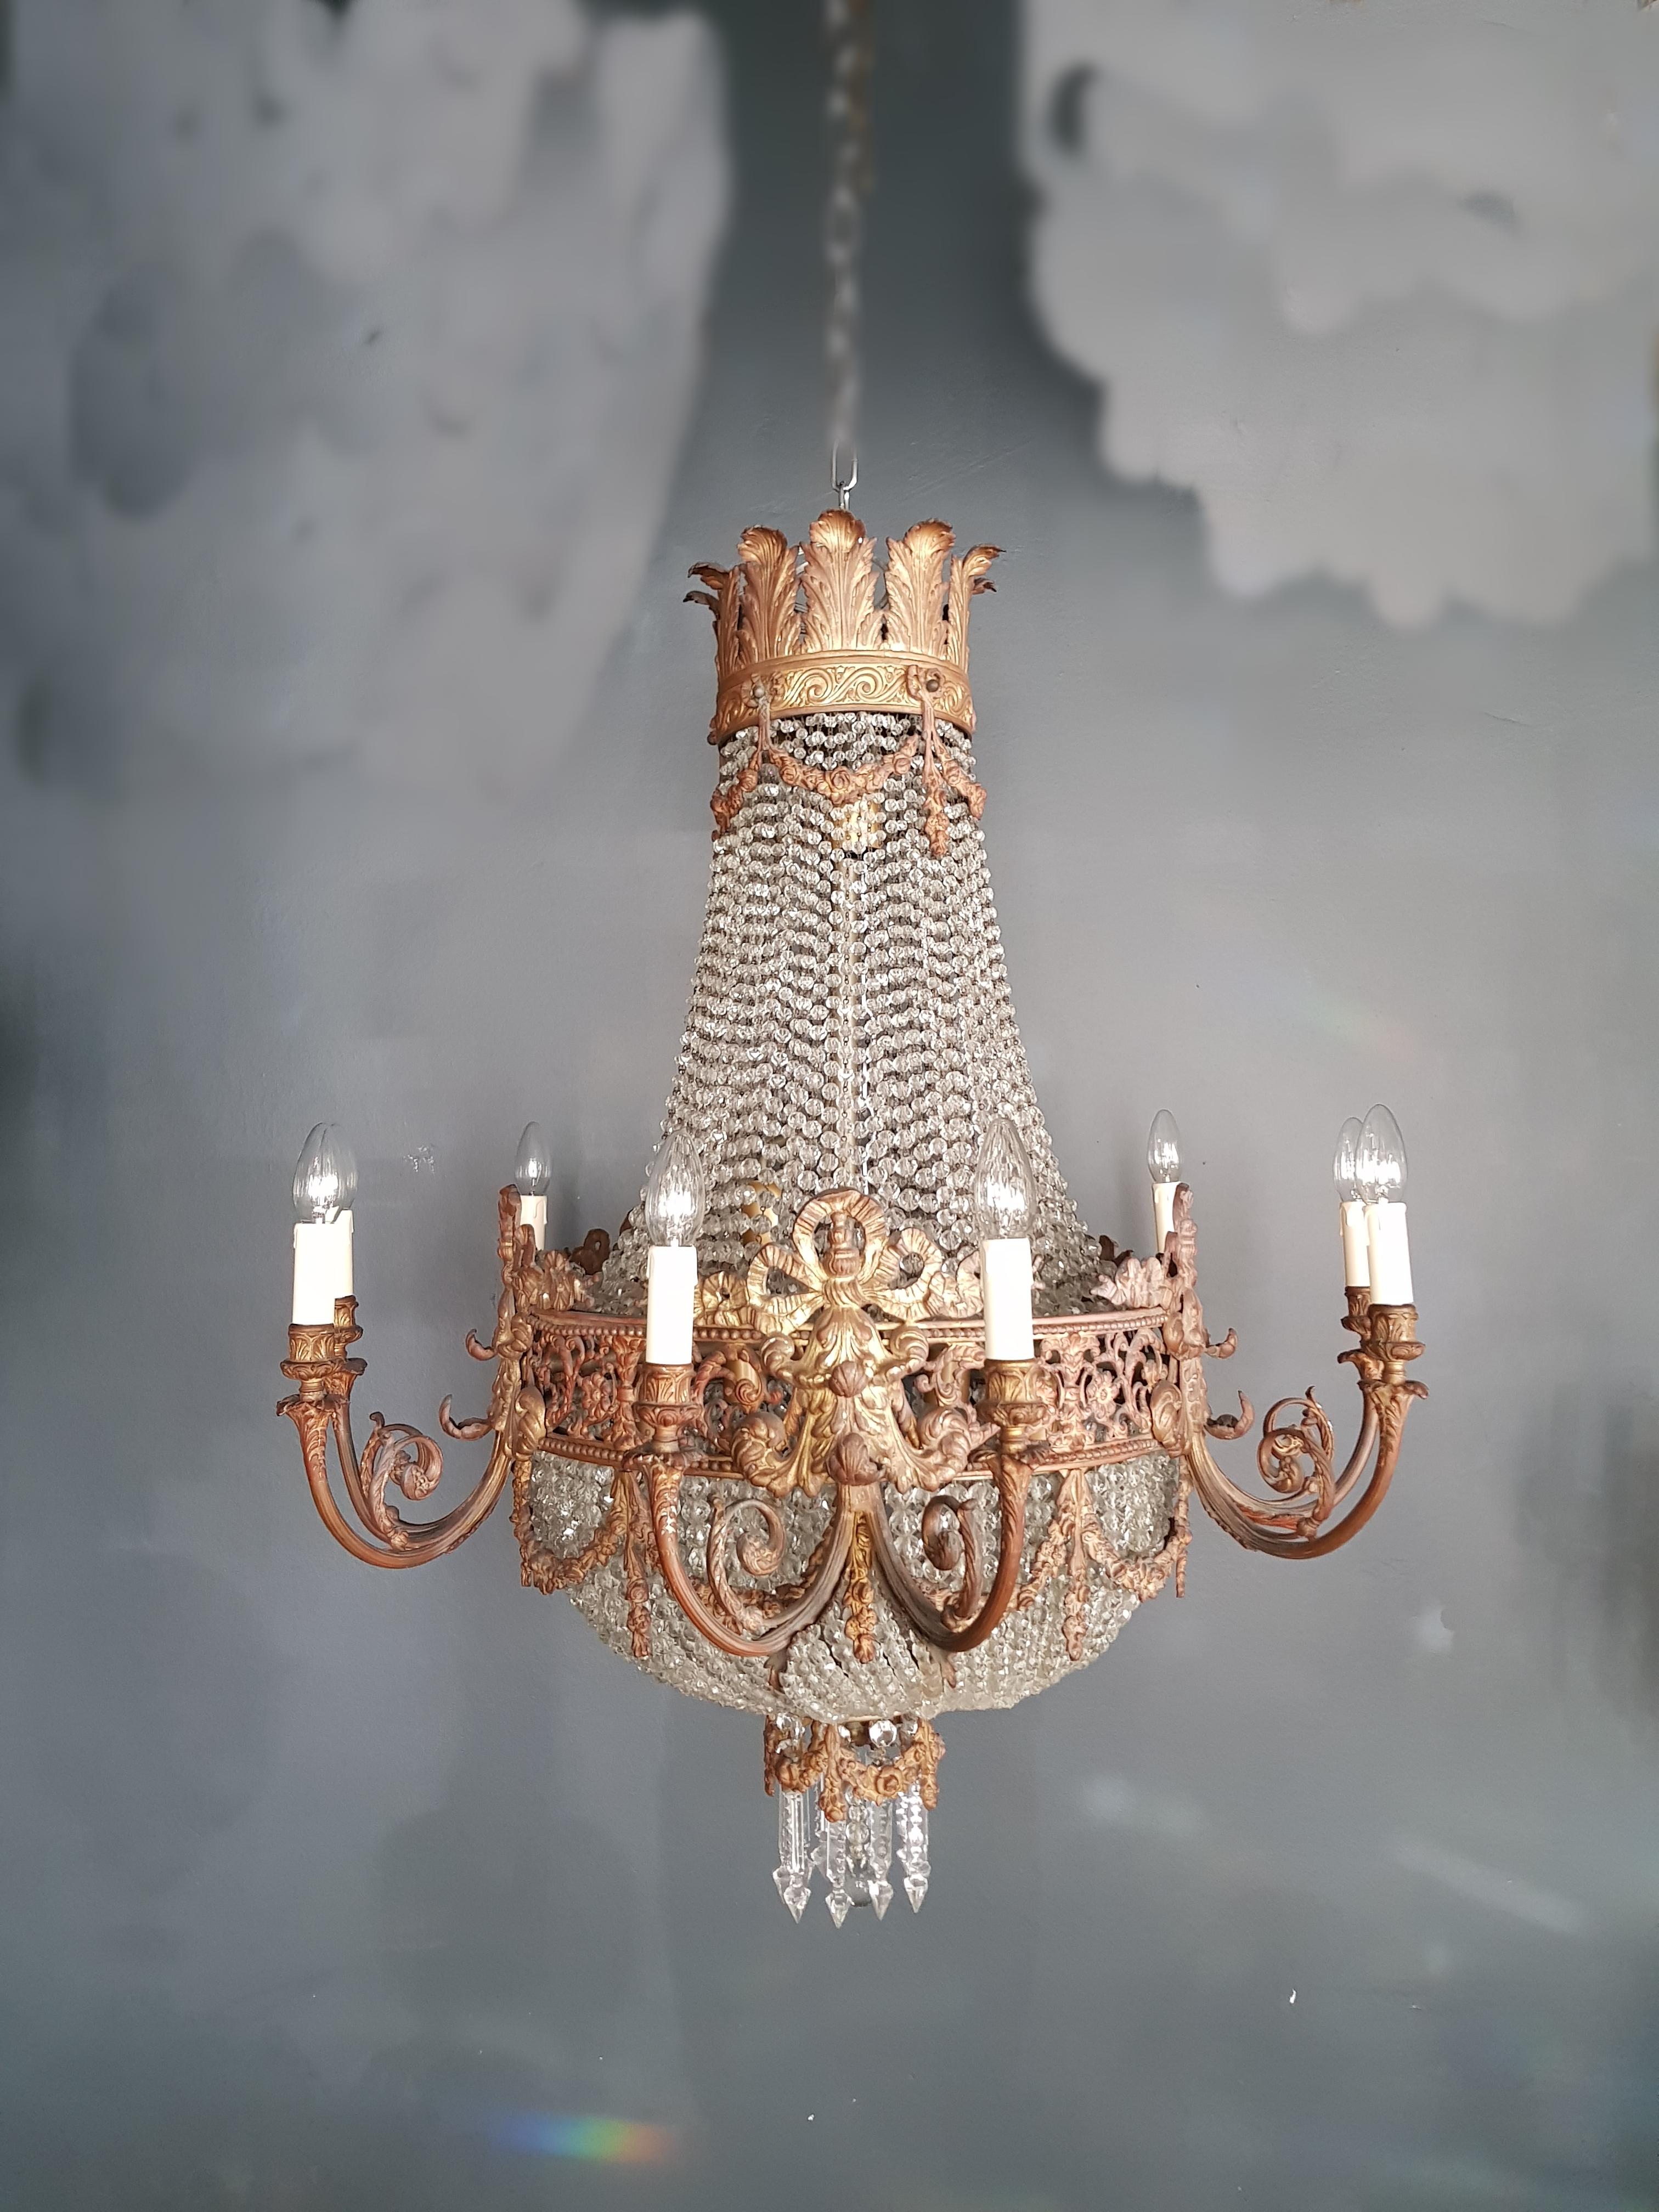 This beaded Empire basket chandelier has 17 lights. All the beads are made of genuine crystal and the drops are made of original Bohemia crystal. Chandelier has been restored but we have maintained the original shape and integrity of the late 19th